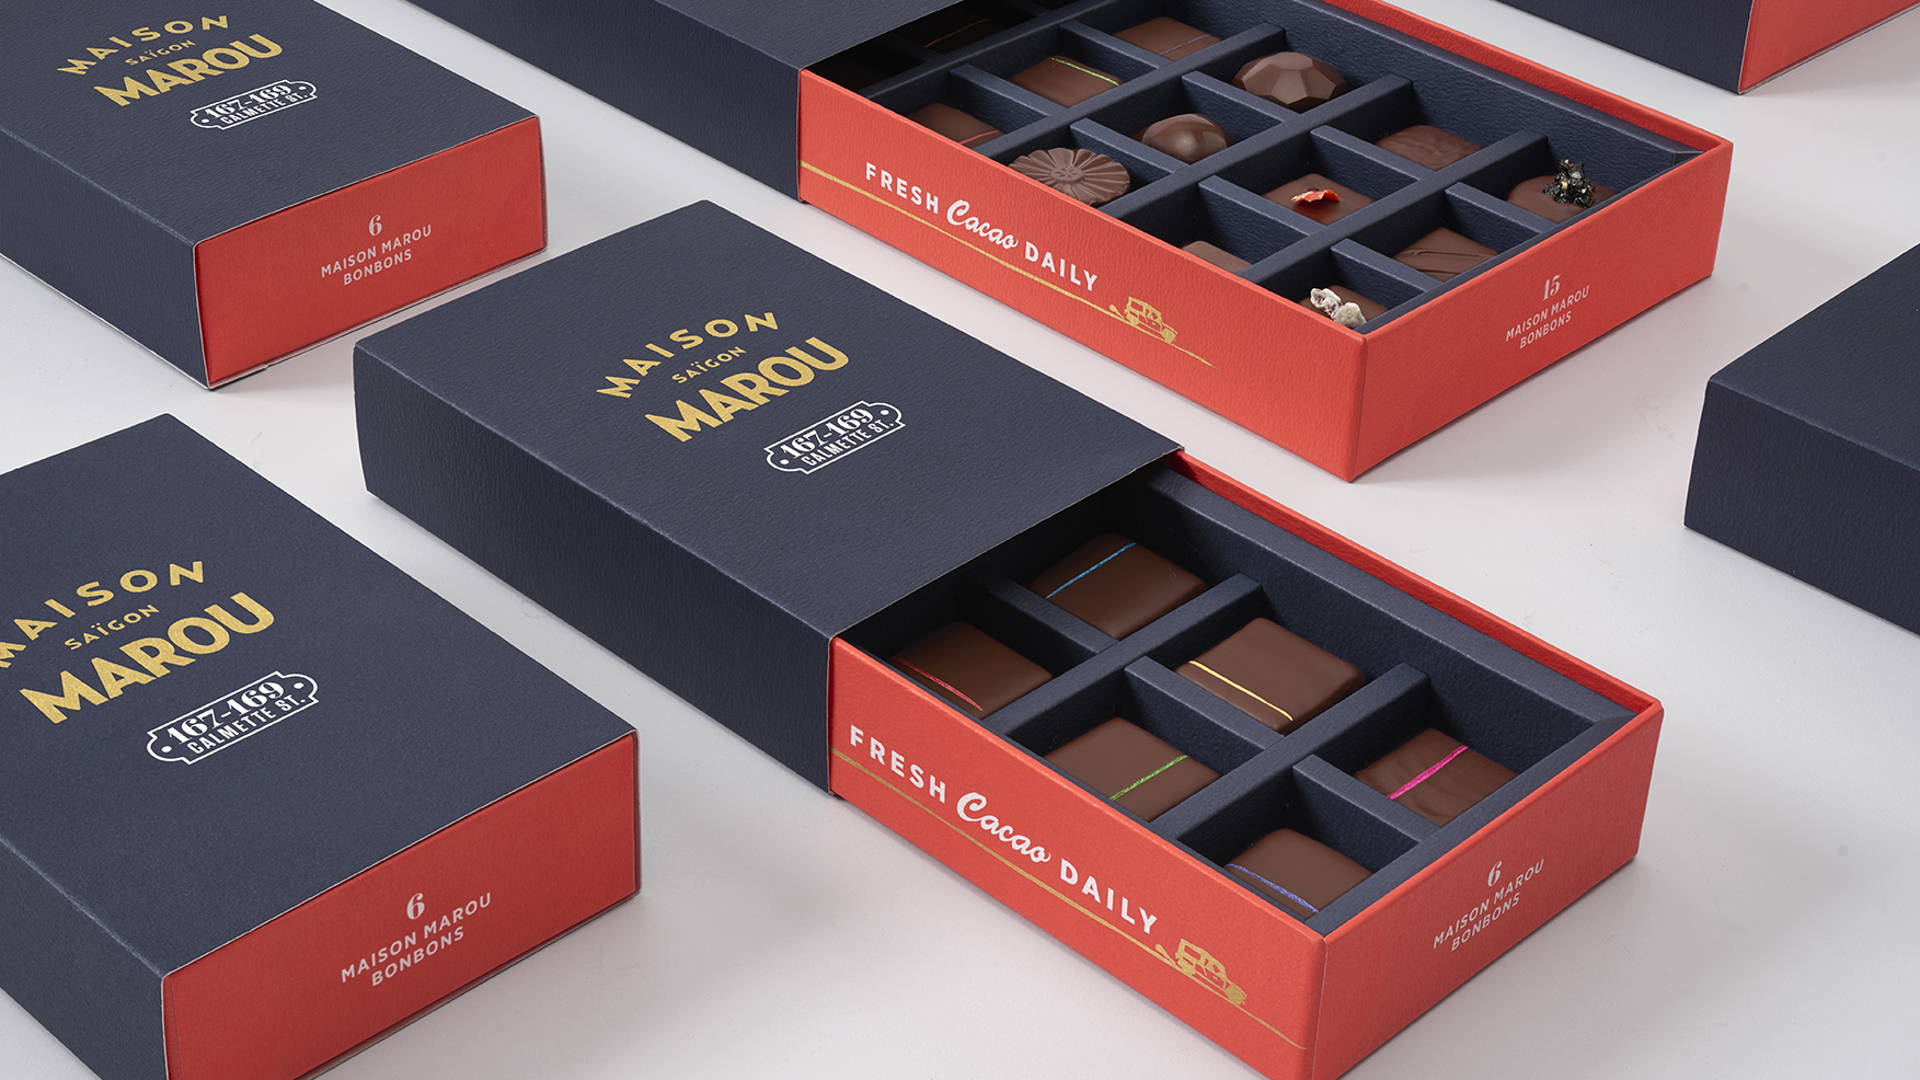 Featured image for Maison Marou Has Some Elegant Chocolate Packaging